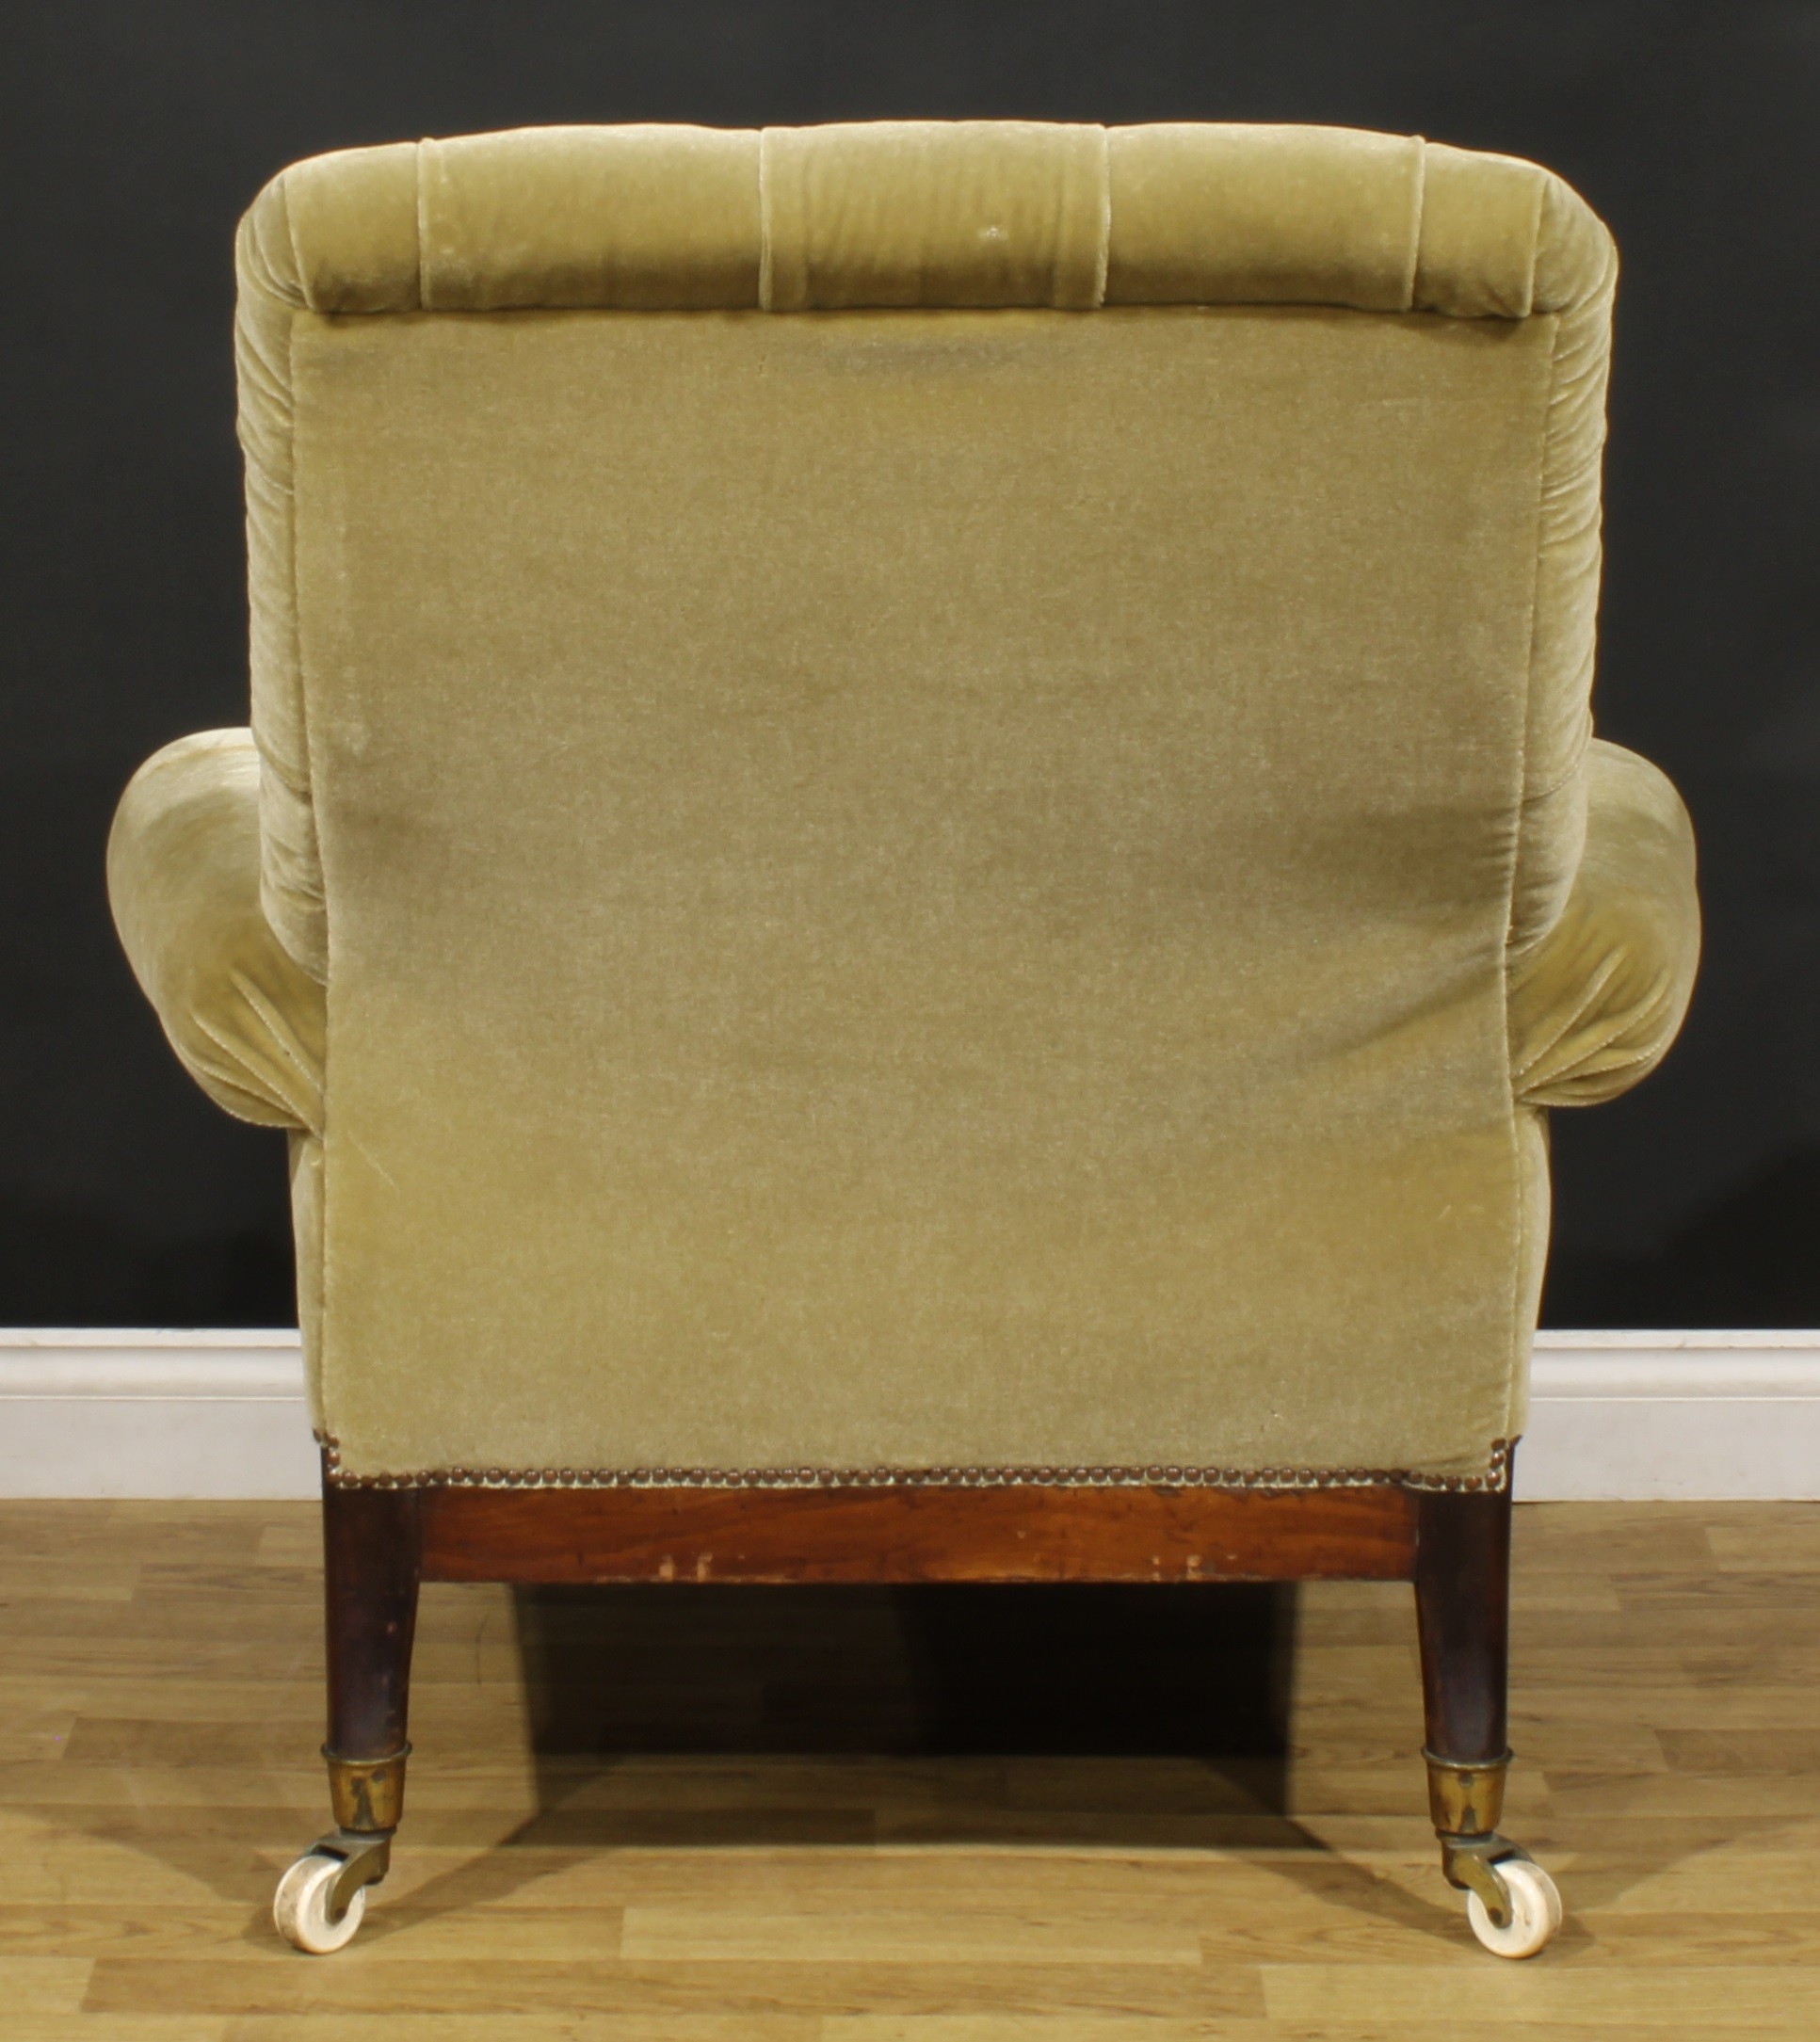 A substantial 19th century mahogany lyre-form library chair, in the manner of Gillows of Lancaster - Image 4 of 4